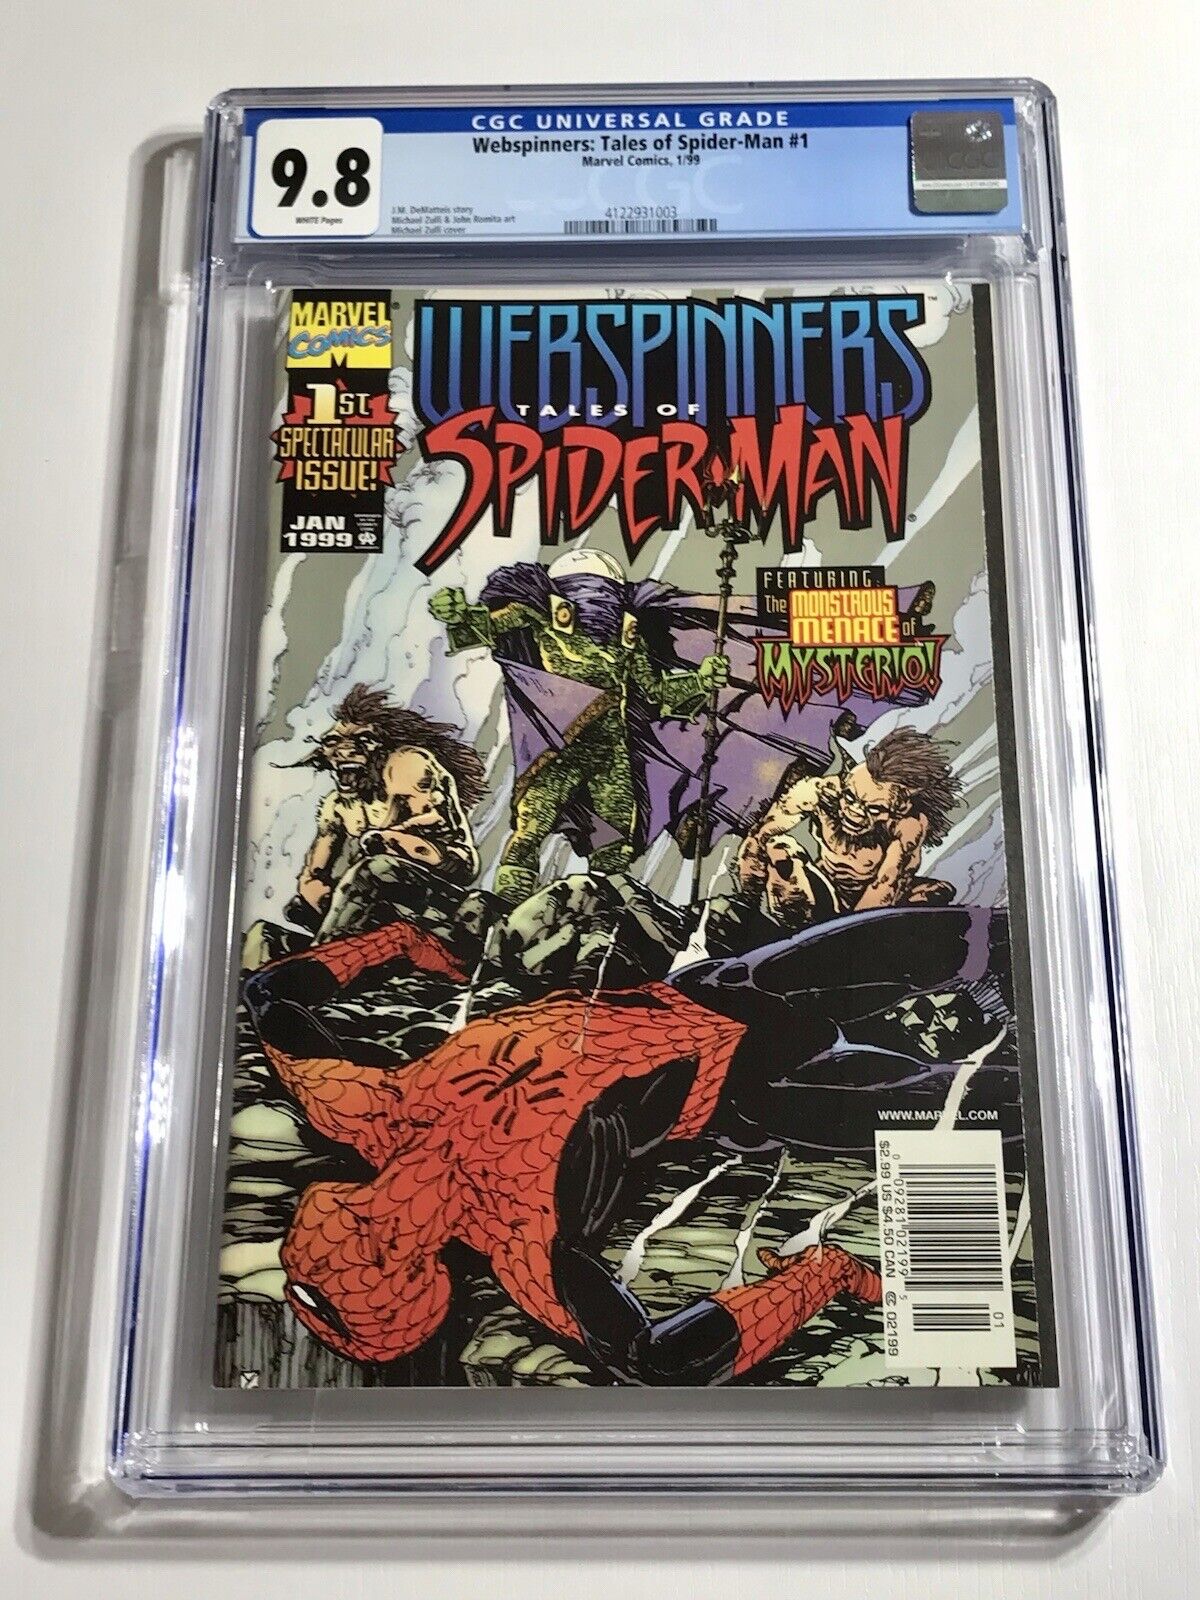 1999 Webspinners Tales of Spider-Man #1 RARE NEWSSTAND VARIANT GRADED CGC 9.8 WP